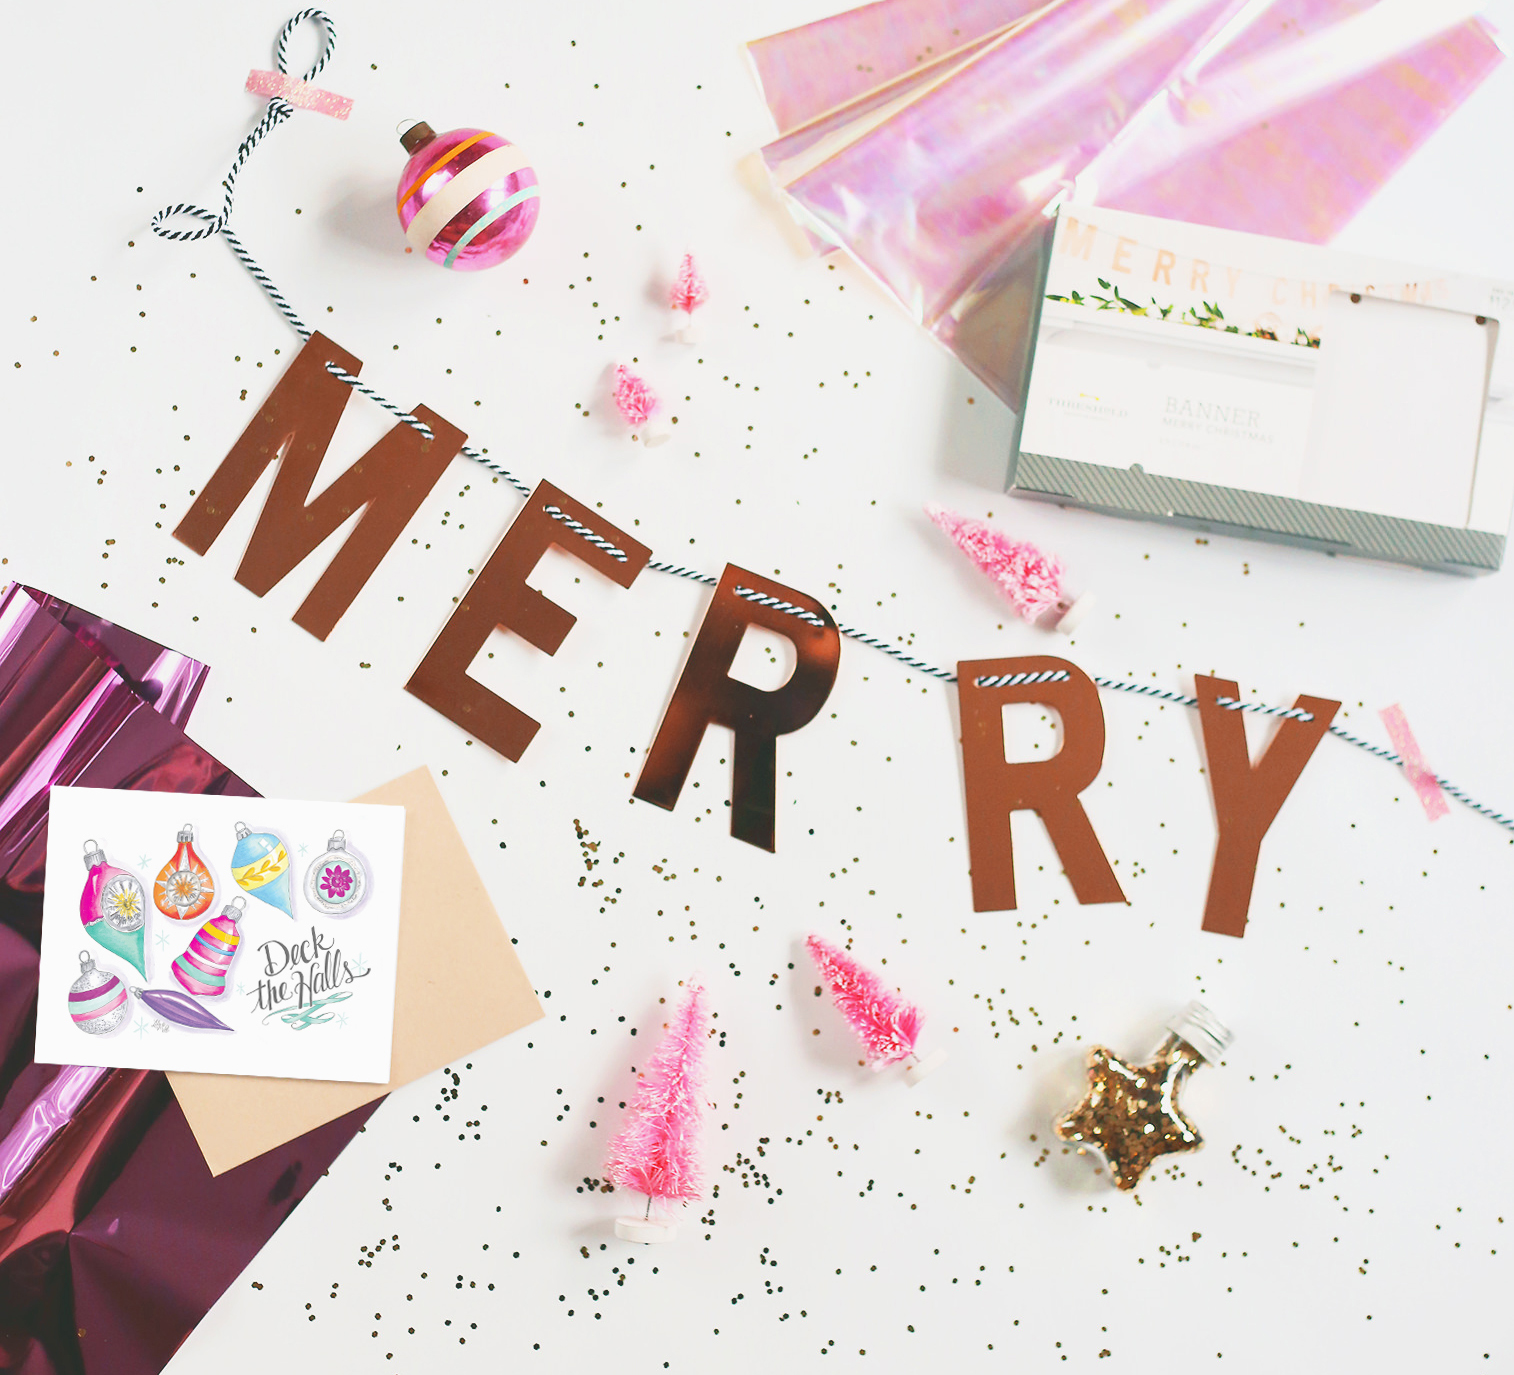 December's Happy Mail includes a festive gold banner, a vintage ornament and plenty of holiday sparkle!